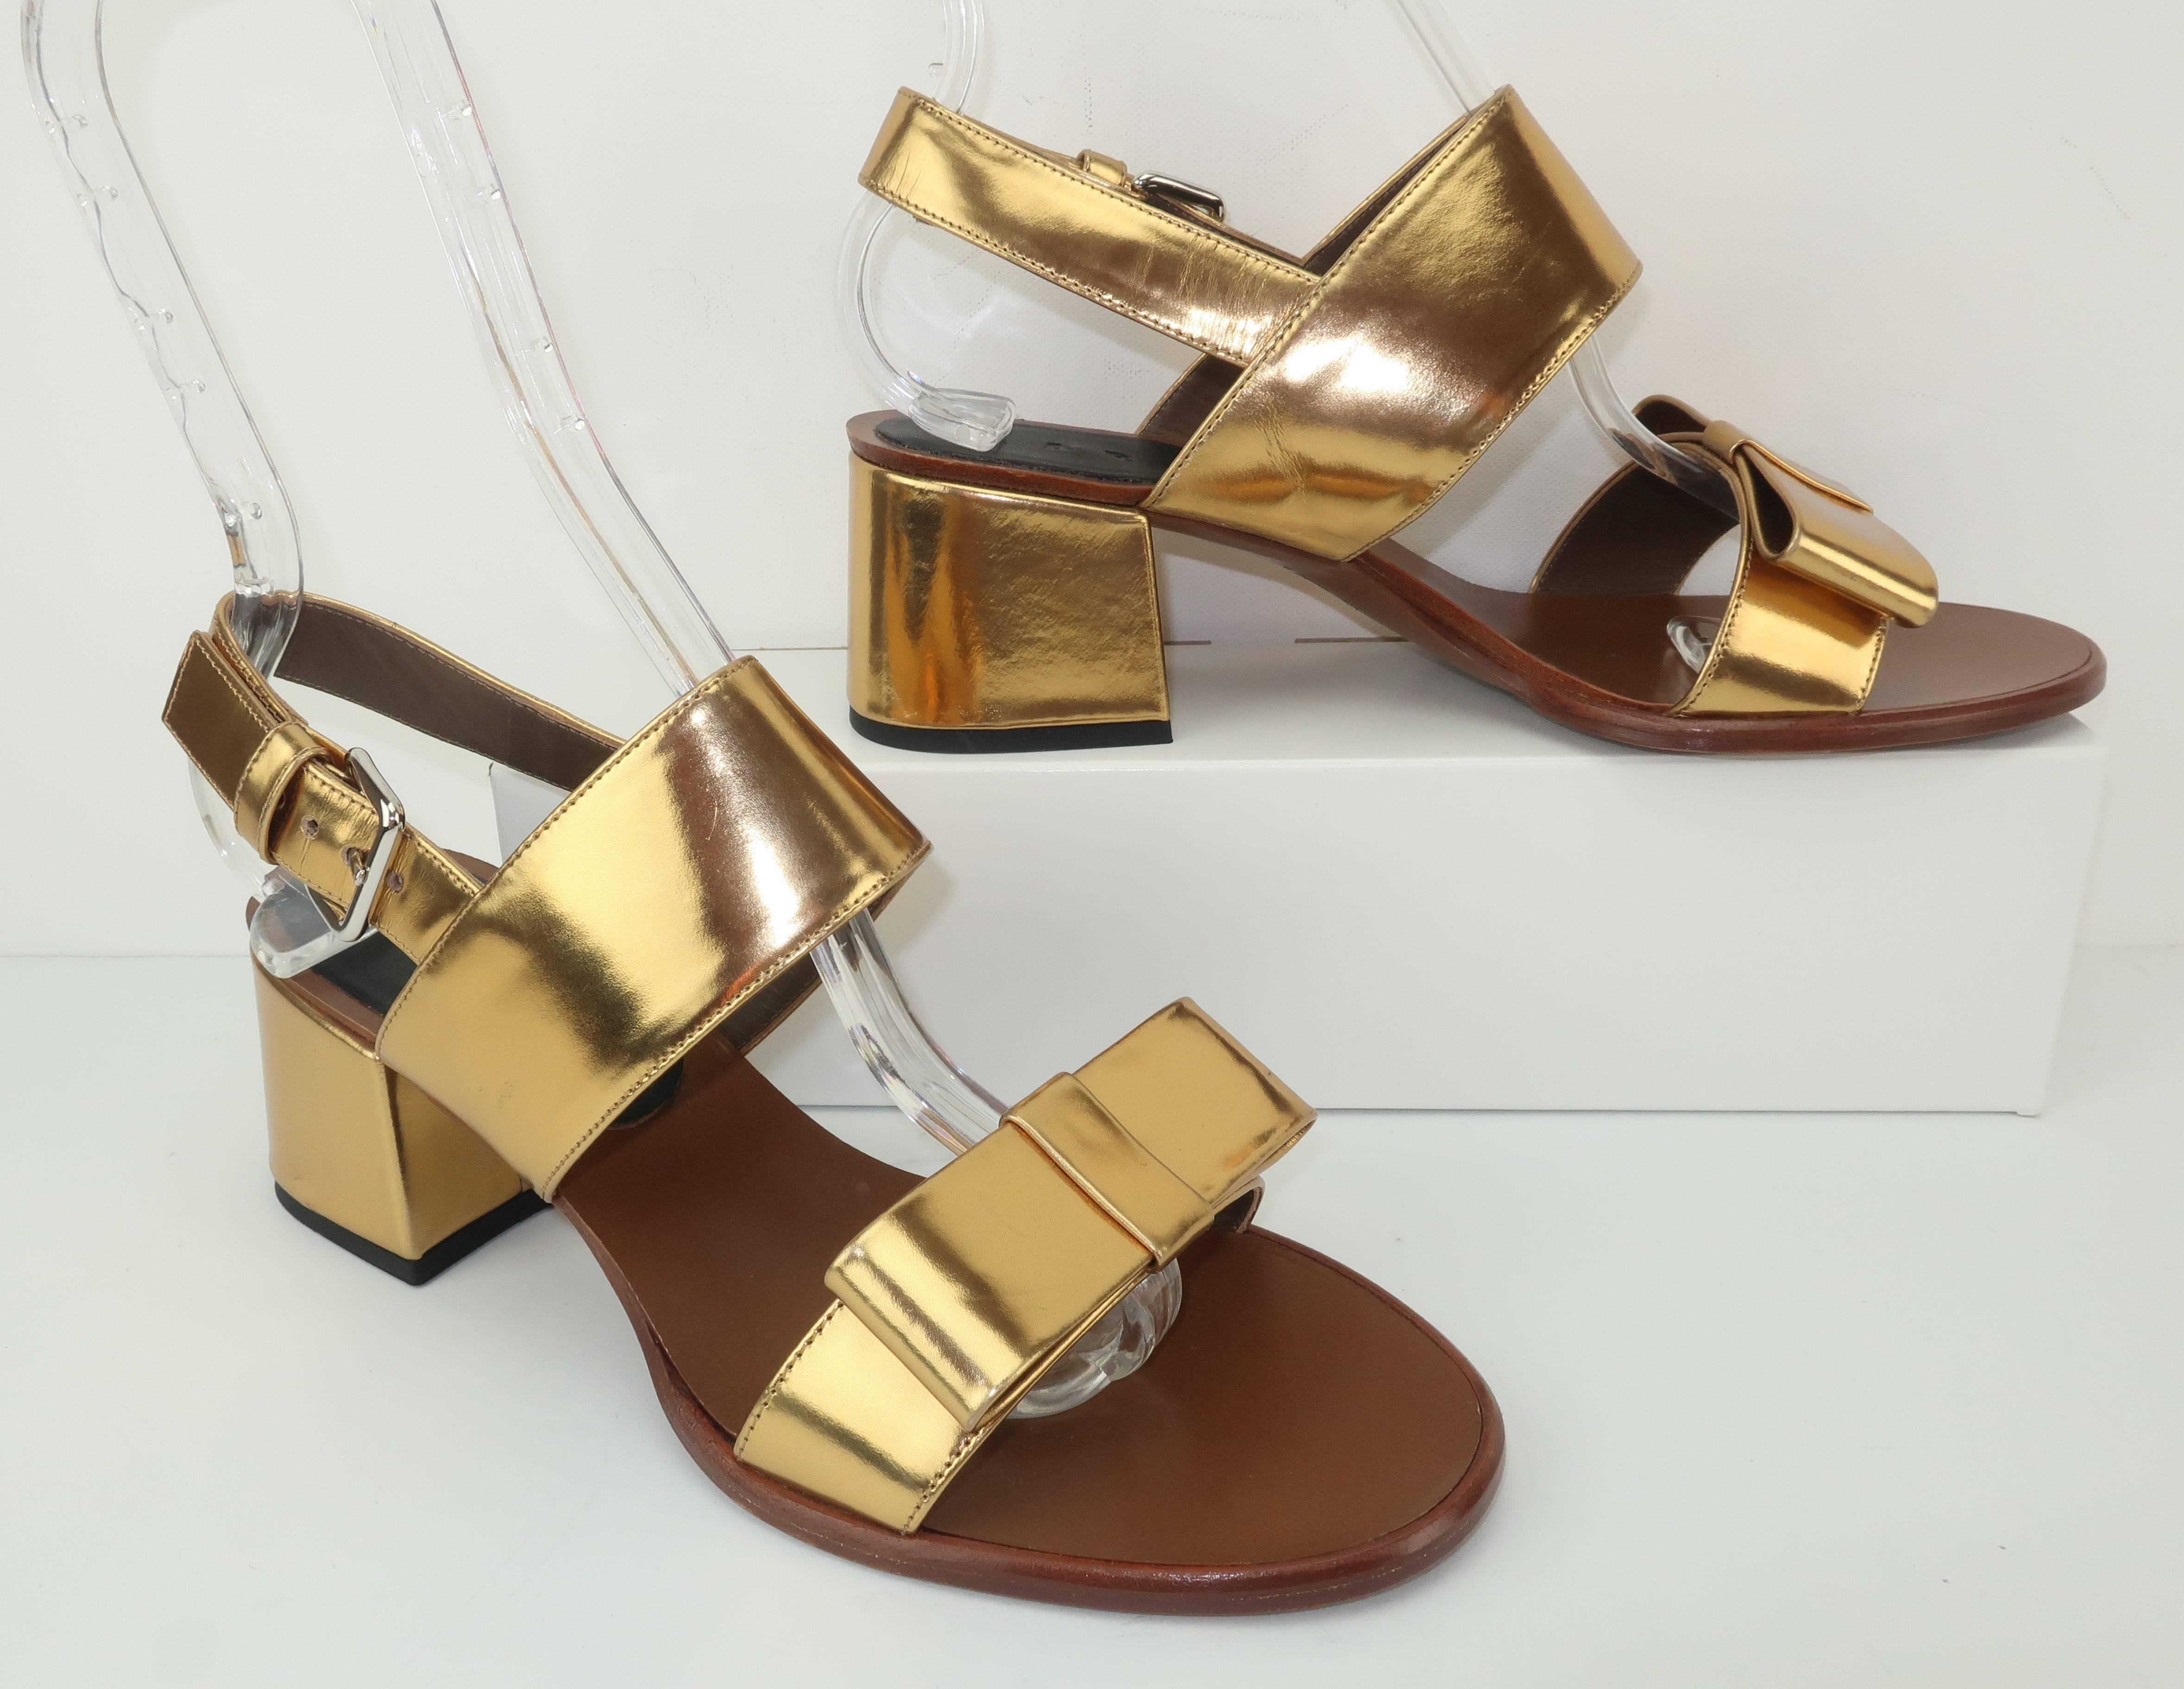 This low heeled sandal by Marni is a fashionable combination of practicality and frivolity.  The gold leather body has a 1960's style silhouette with an adjustable slingback strap and a girlish bow embellishment.  The 2.25